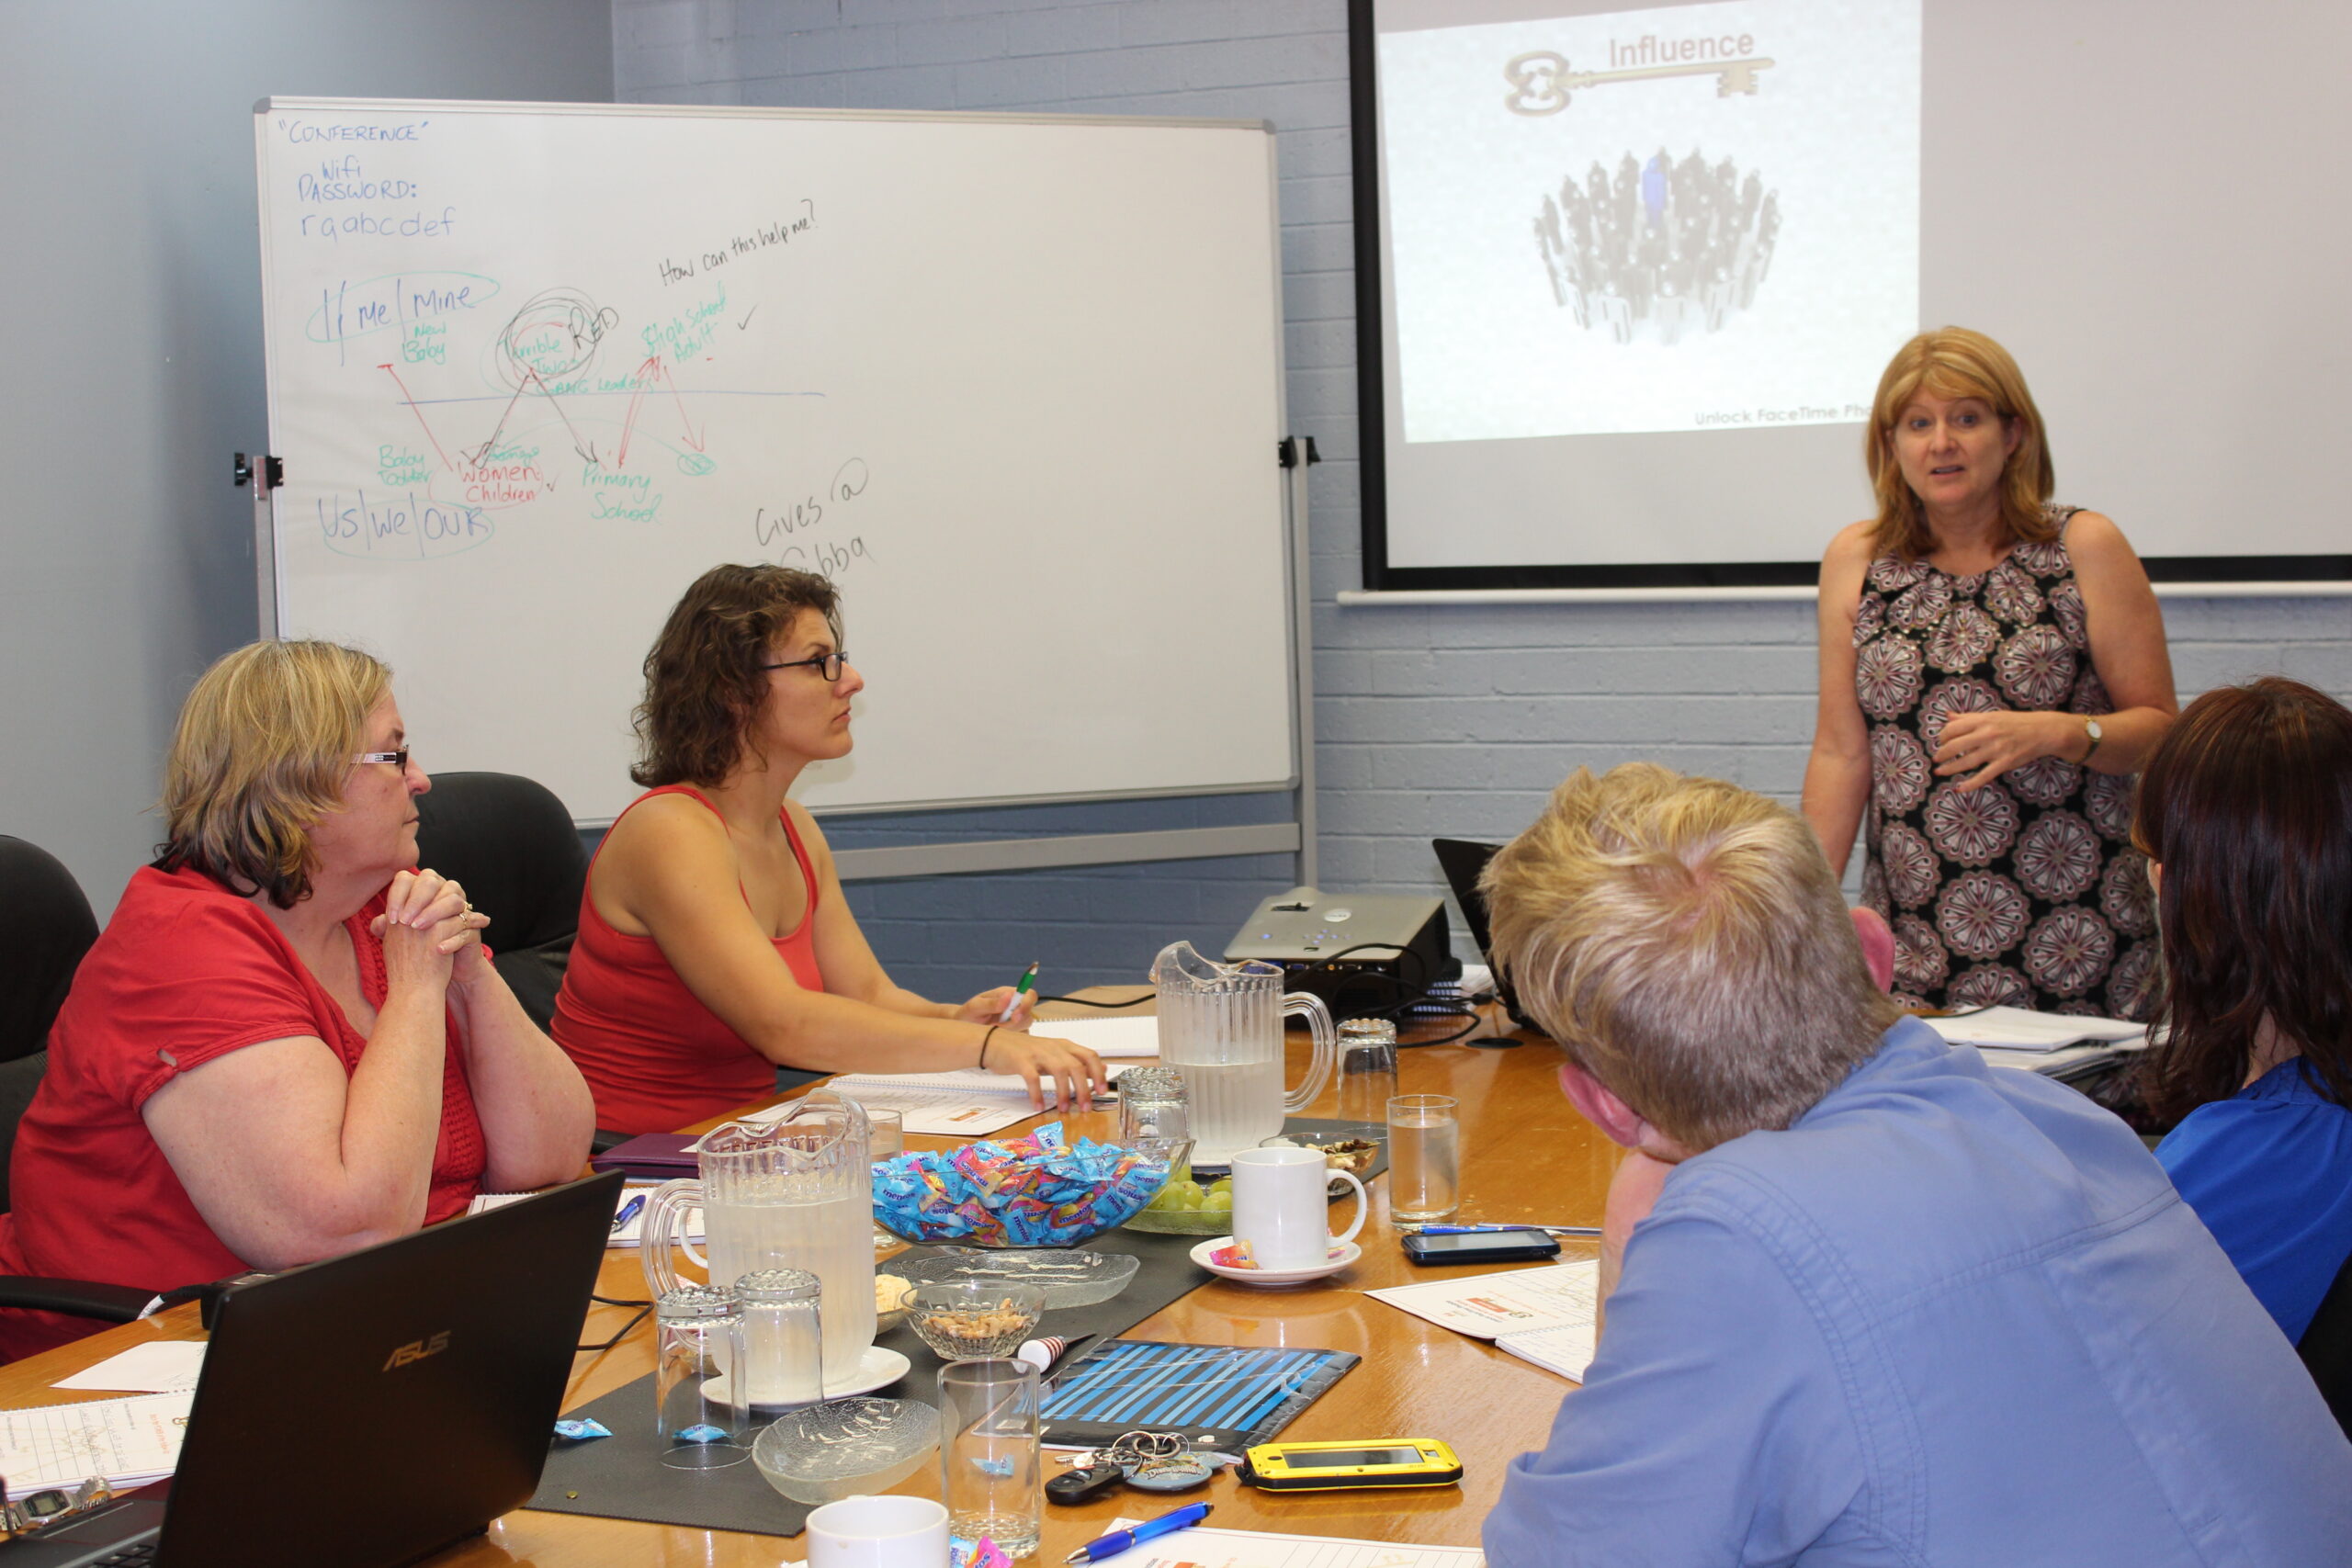 an image of Janeen conducting personal brand authority training to a small group of business people